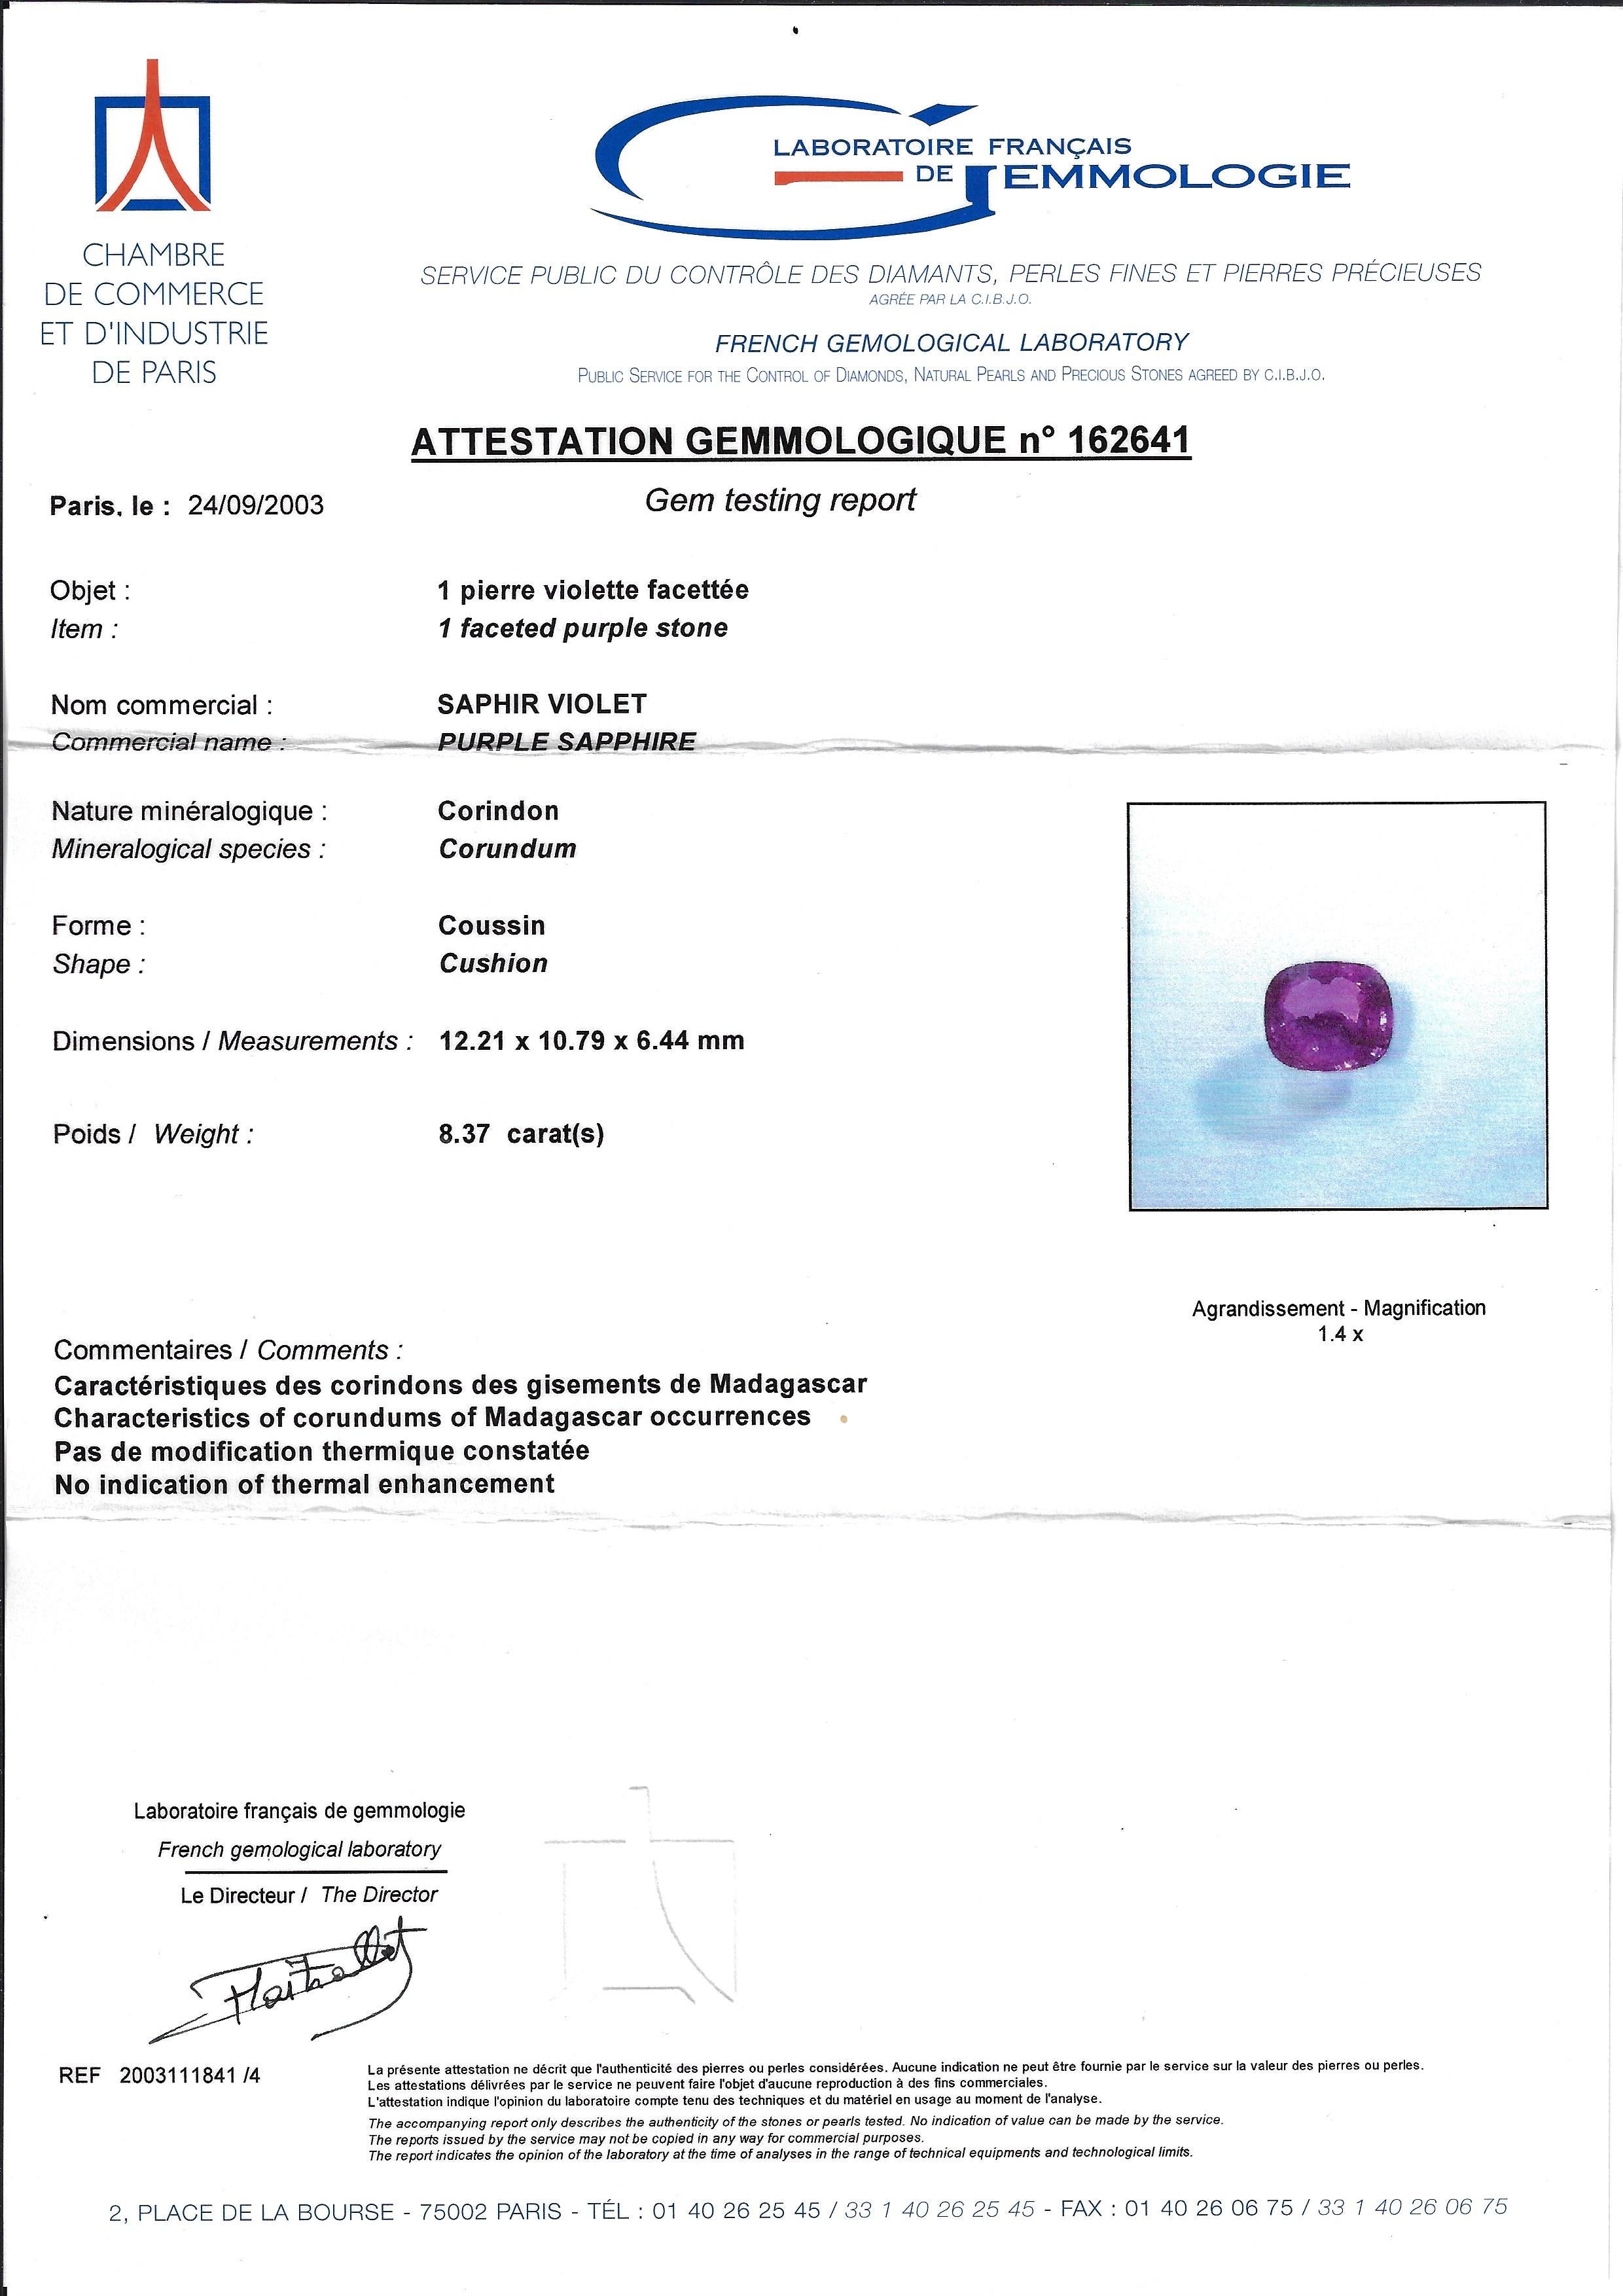 This is an opportunity for you to get a bespoke piece of jewelry designed, working with legendary Paris High Jeweller Édéenne. Using this exceptional 8.37 carat purple sapphire – certified as a pure, non heat purple sapphire of Madagascar origin.